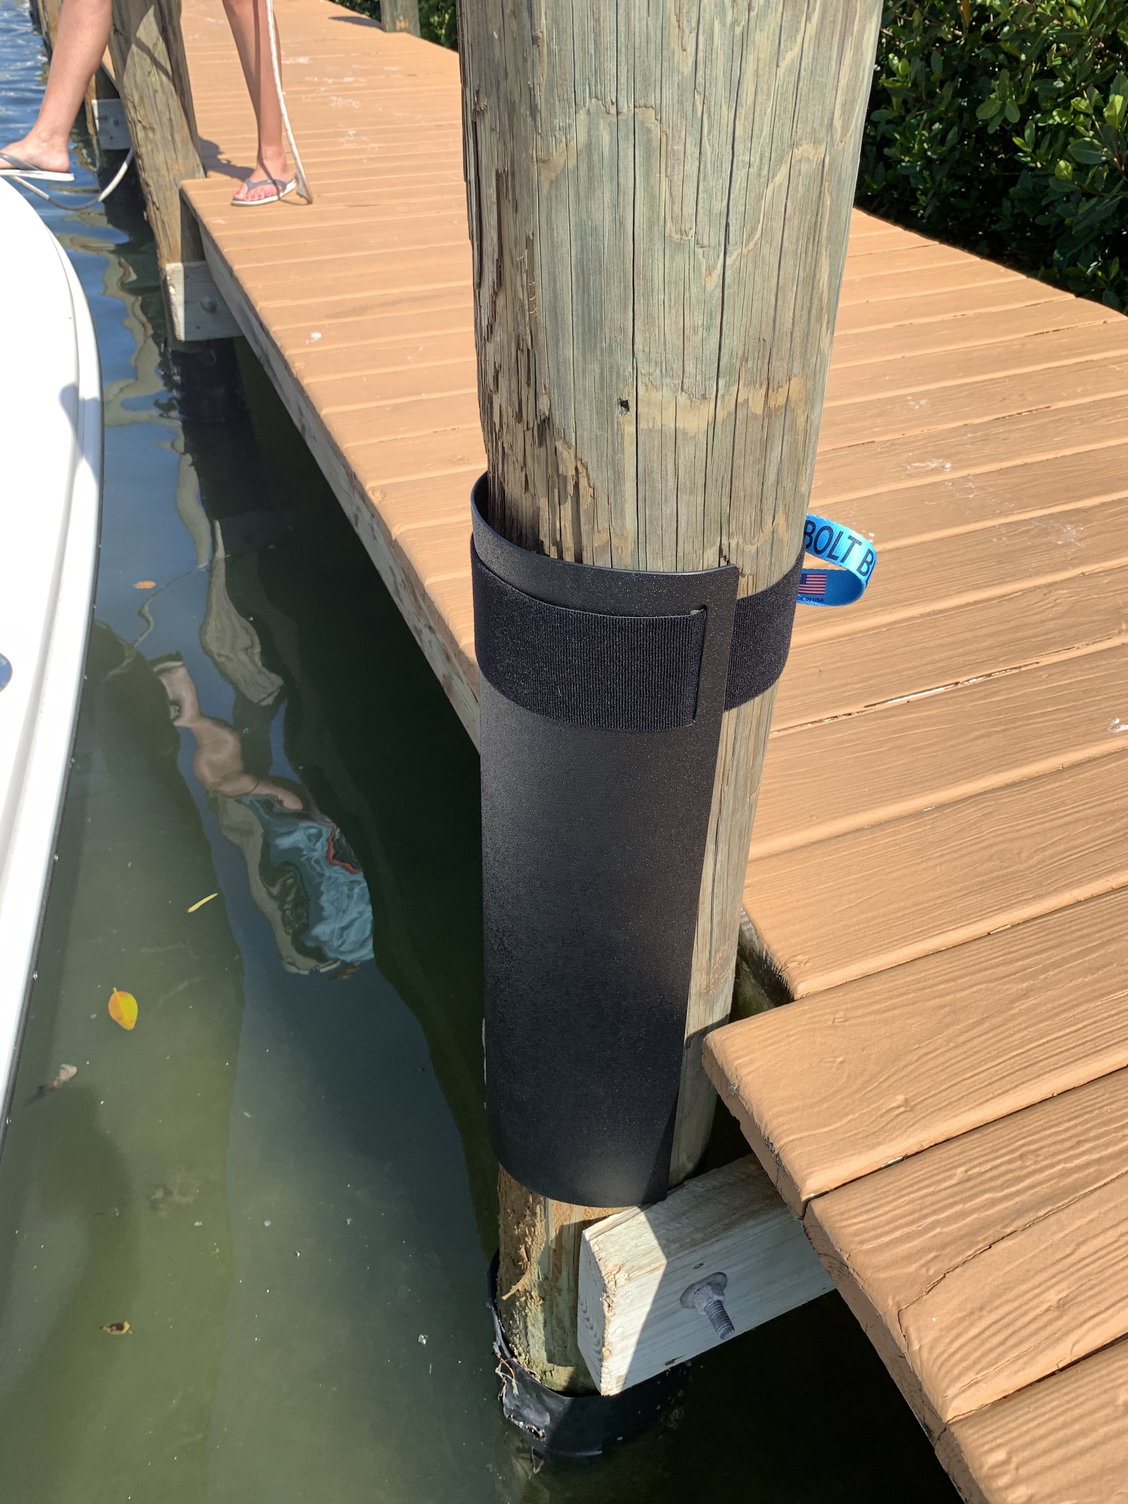 How replace rope rub rail?? - The Hull Truth - Boating and Fishing Forum